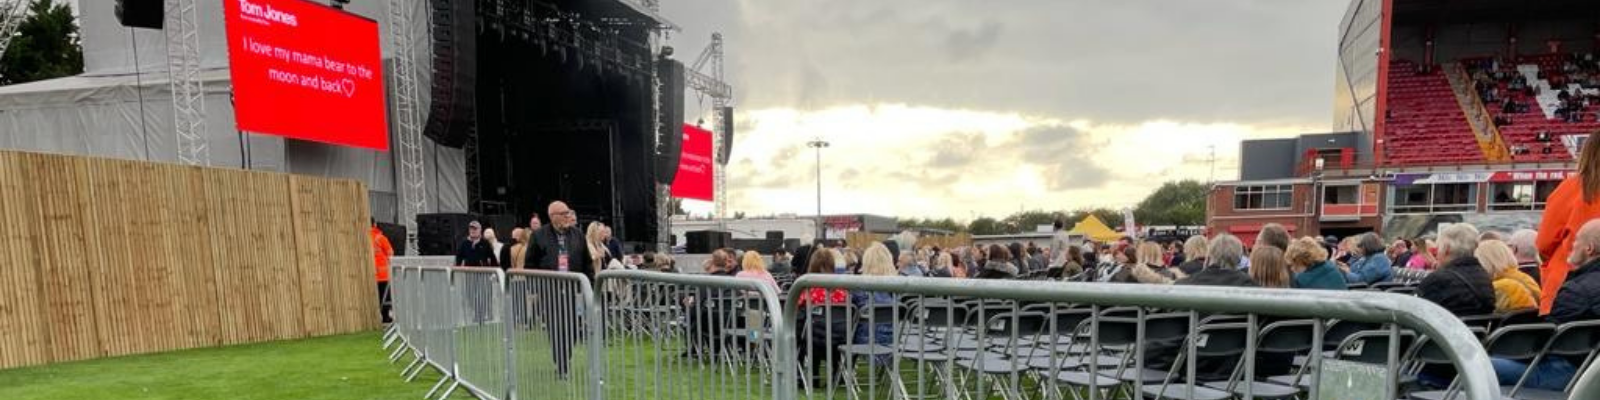 SmartWeld Barriers being used to provide crowd control at a Tom Jones Concert